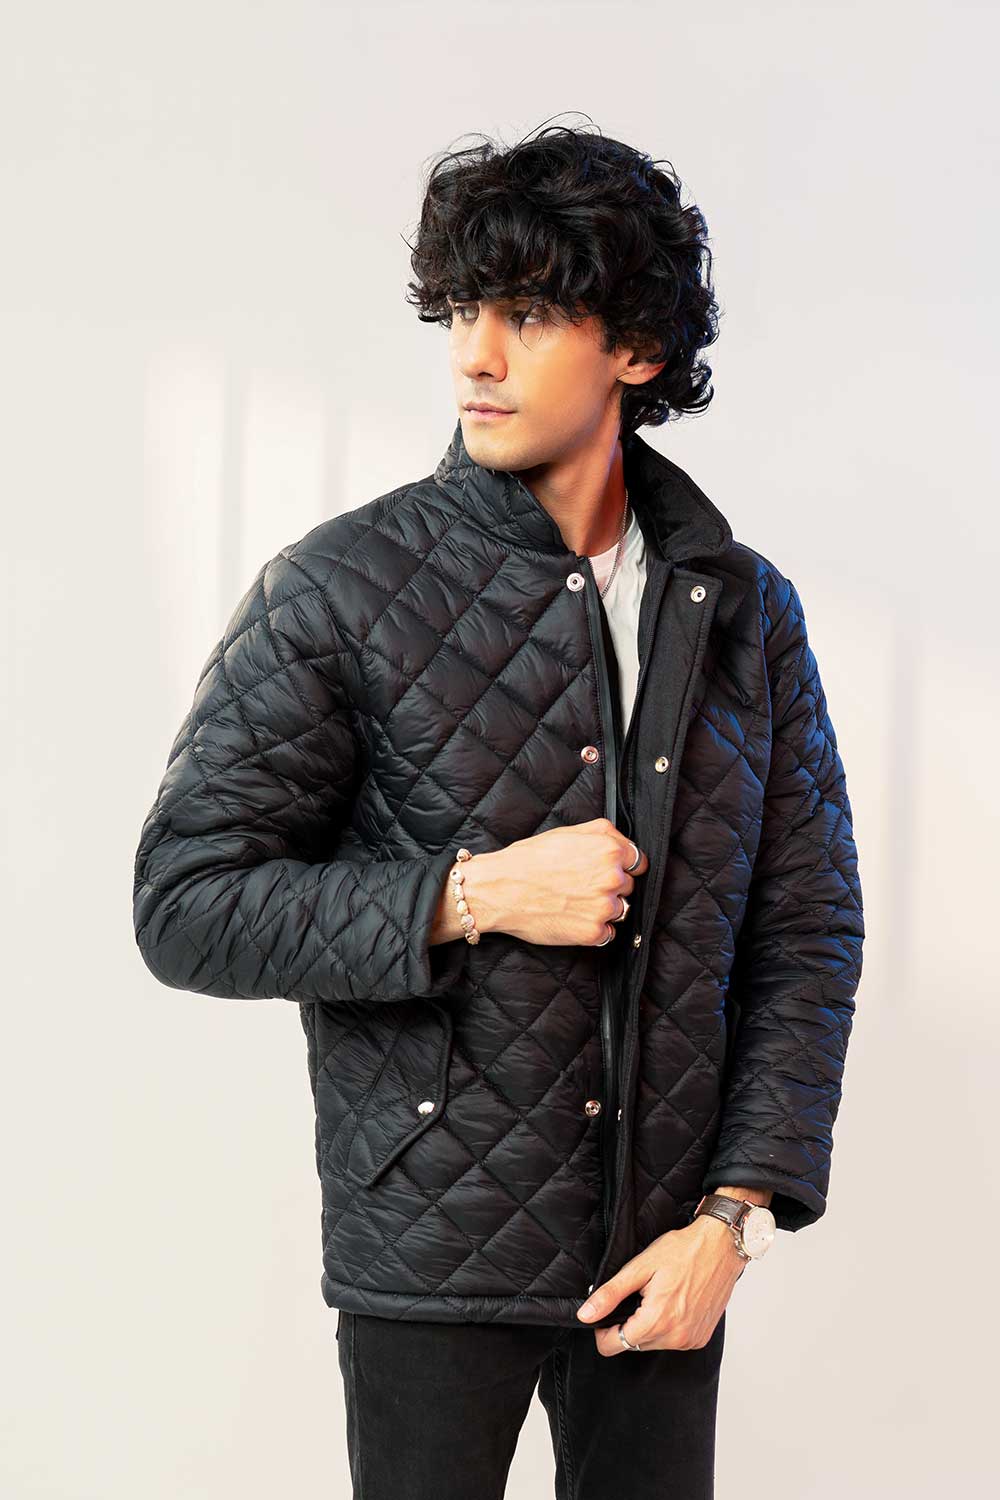 Premium Black Quilted Jacket (Buttoned) For Men in Pakistan